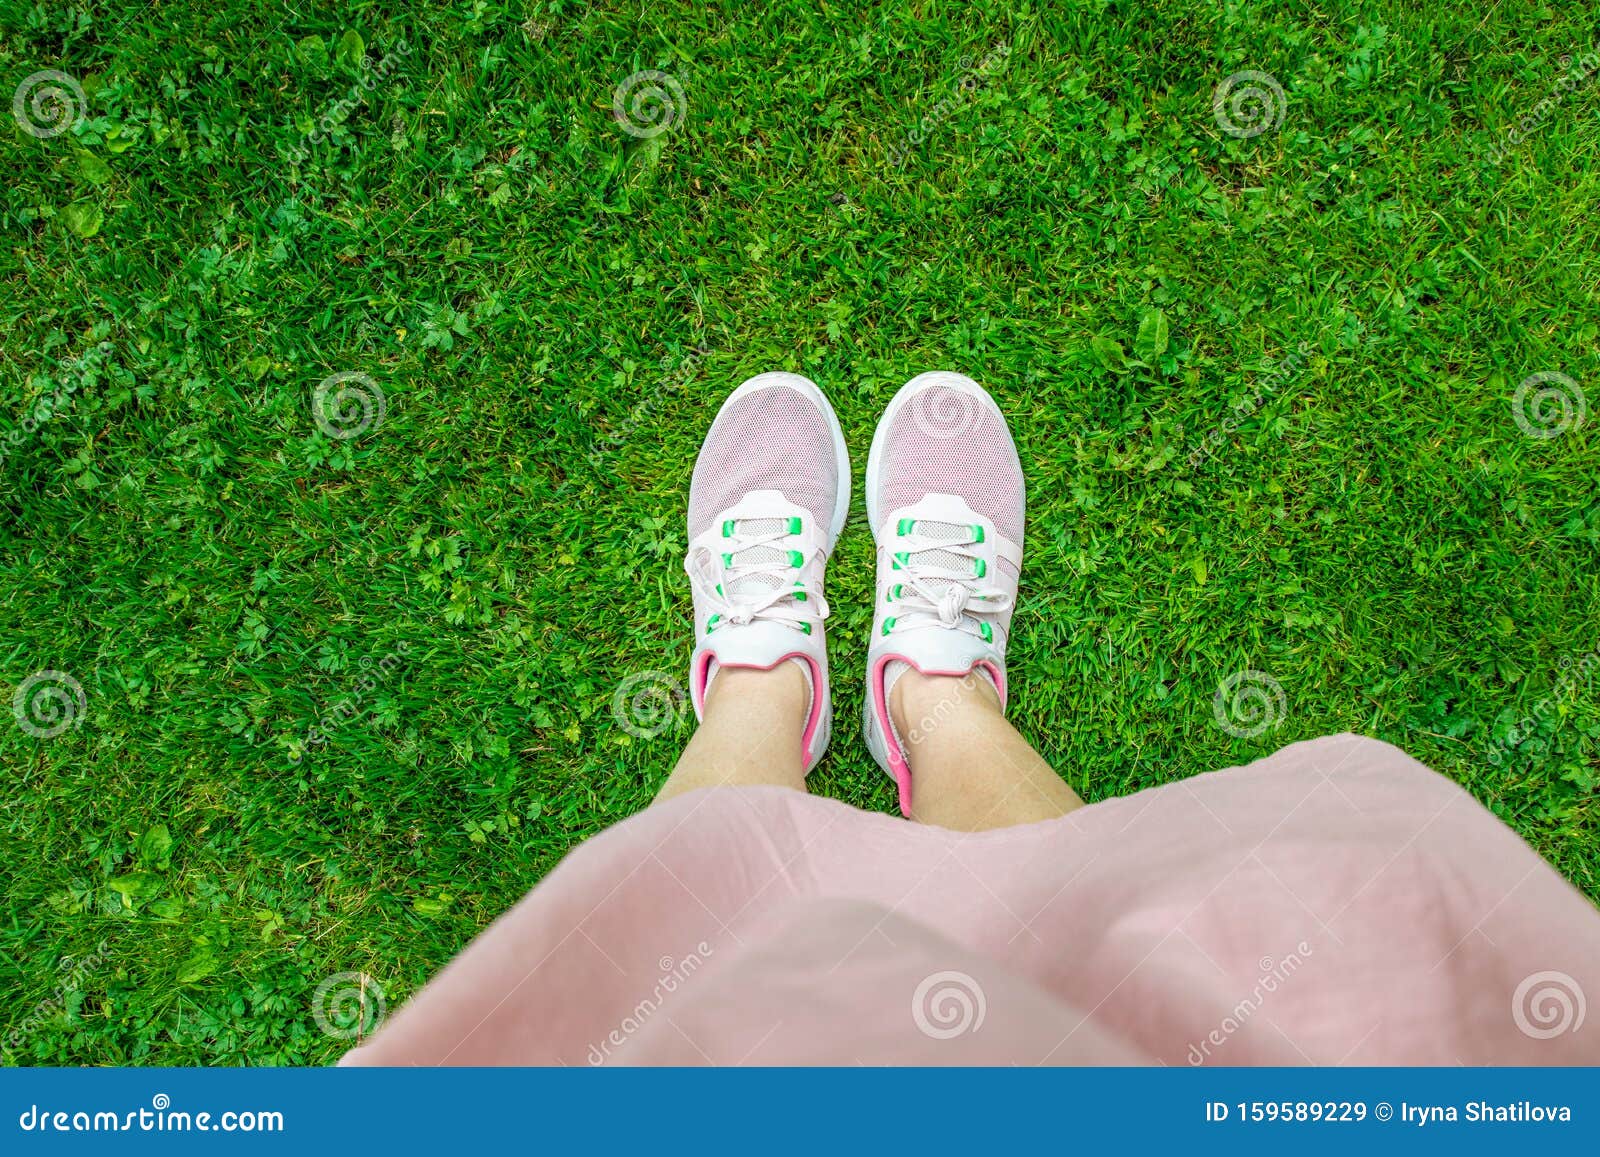 Legs in Pink Sneakers on Green Grass Stock Image - Image of beautiful ...